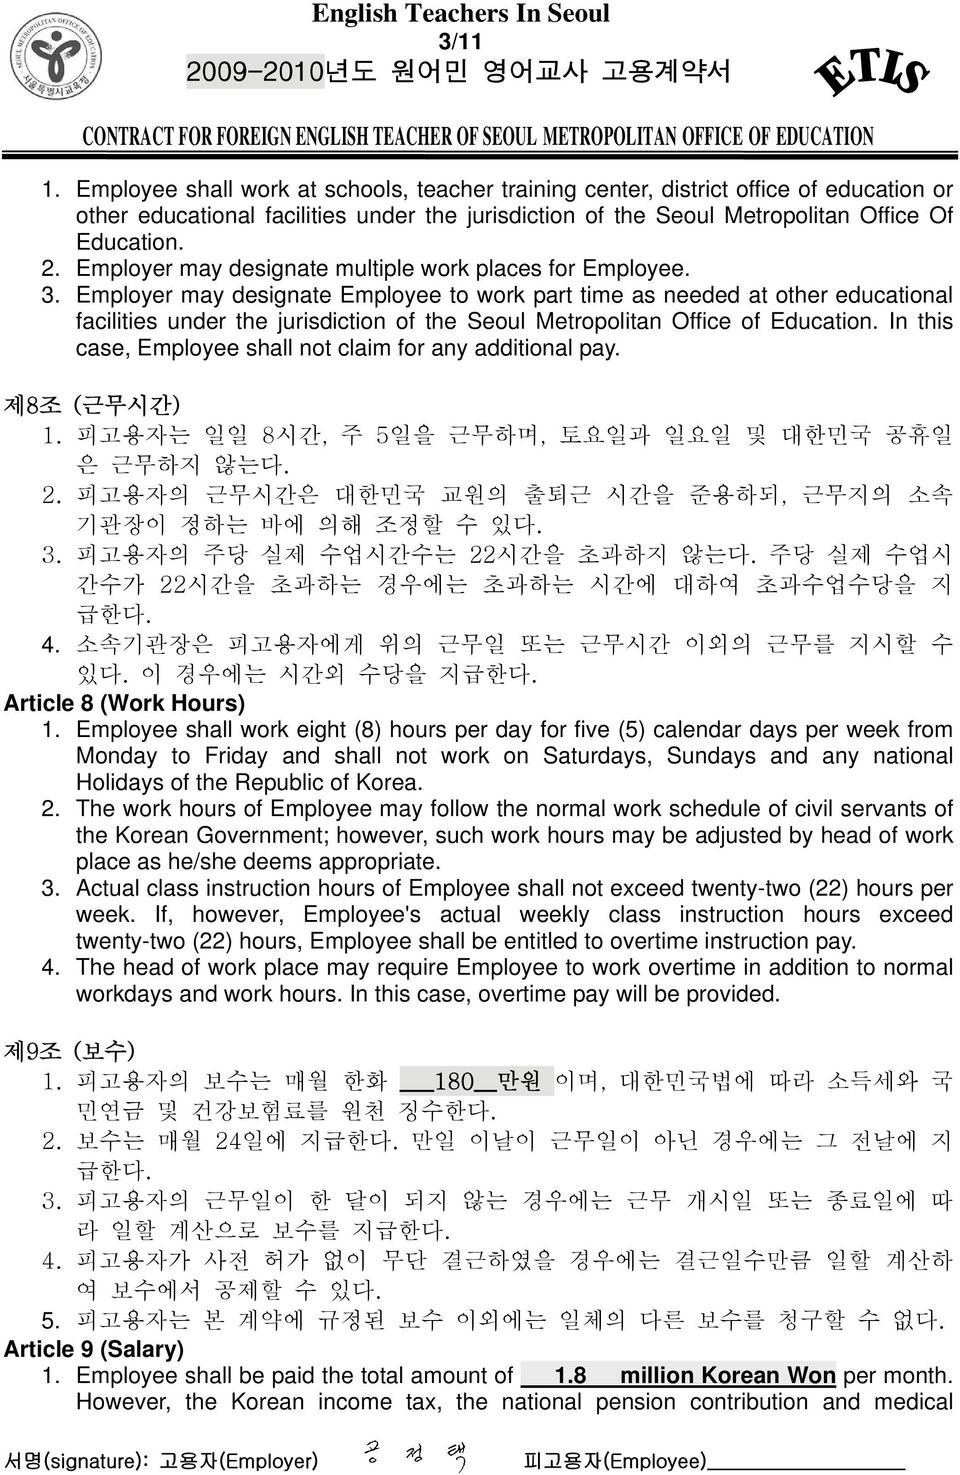 Employer may designate Employee to work part time as needed at other educational facilities under the jurisdiction of the Seoul Metropolitan Office of Education.